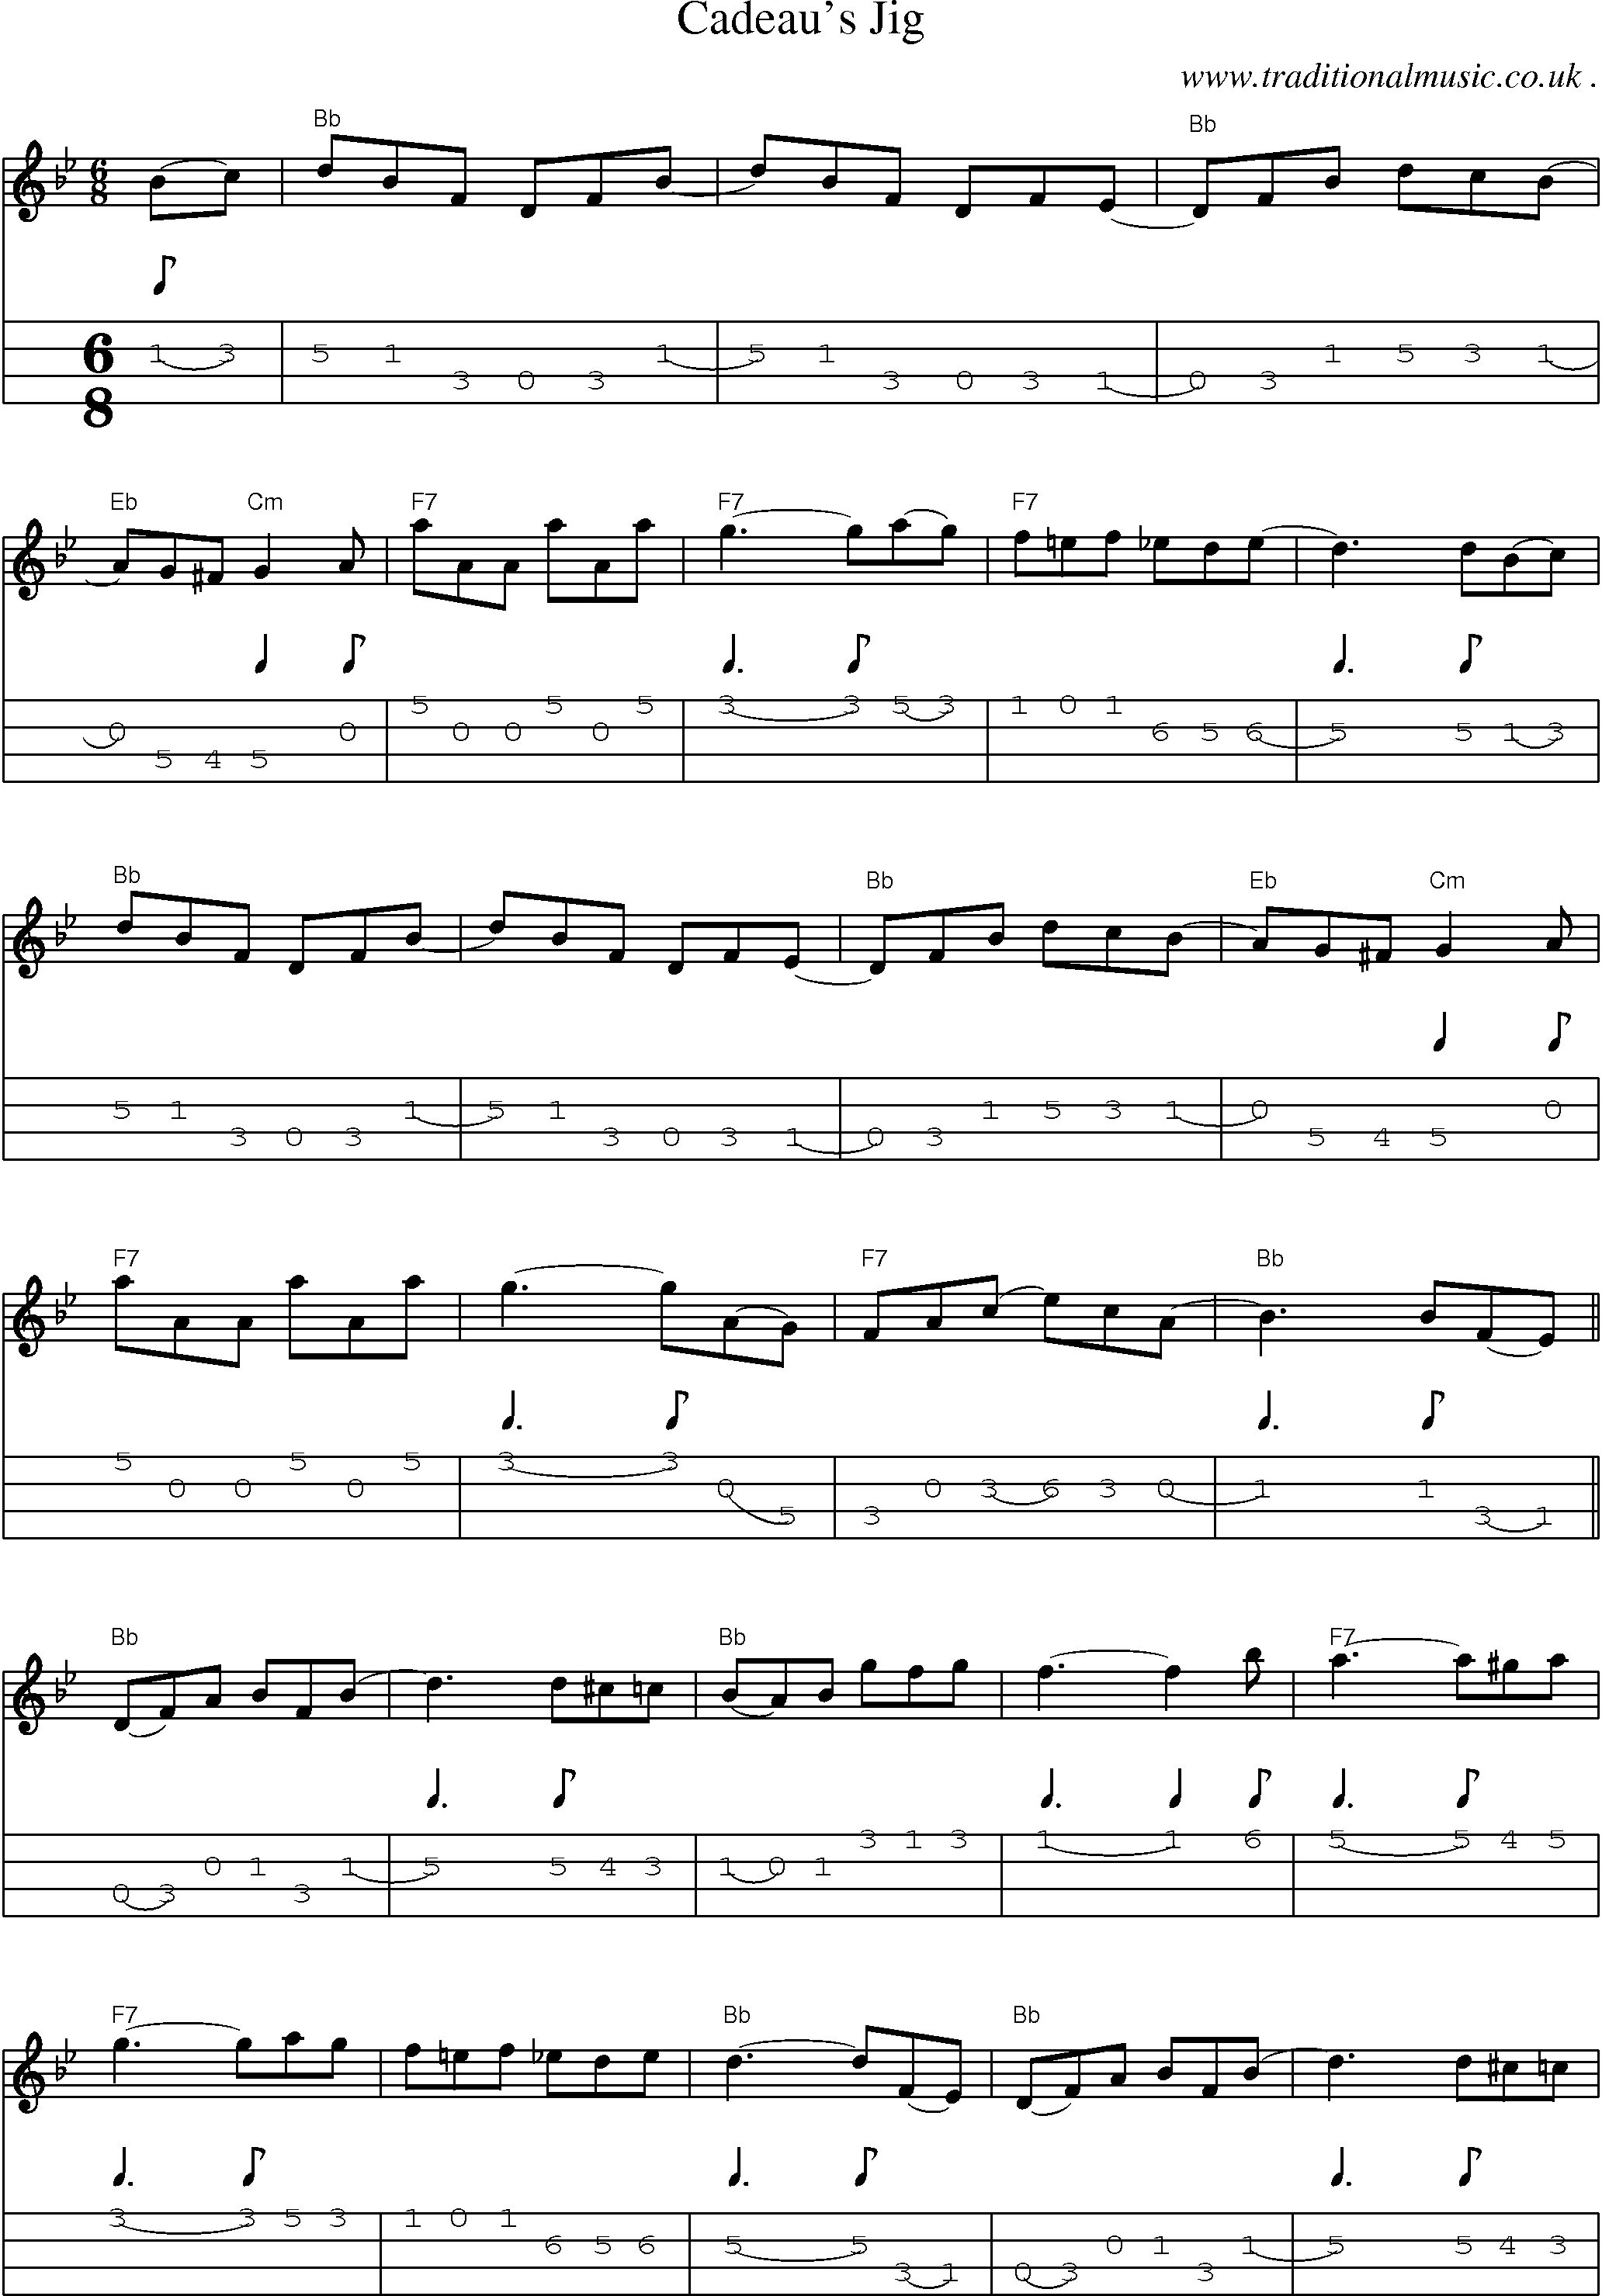 Sheet-Music and Mandolin Tabs for Cadeaus Jig